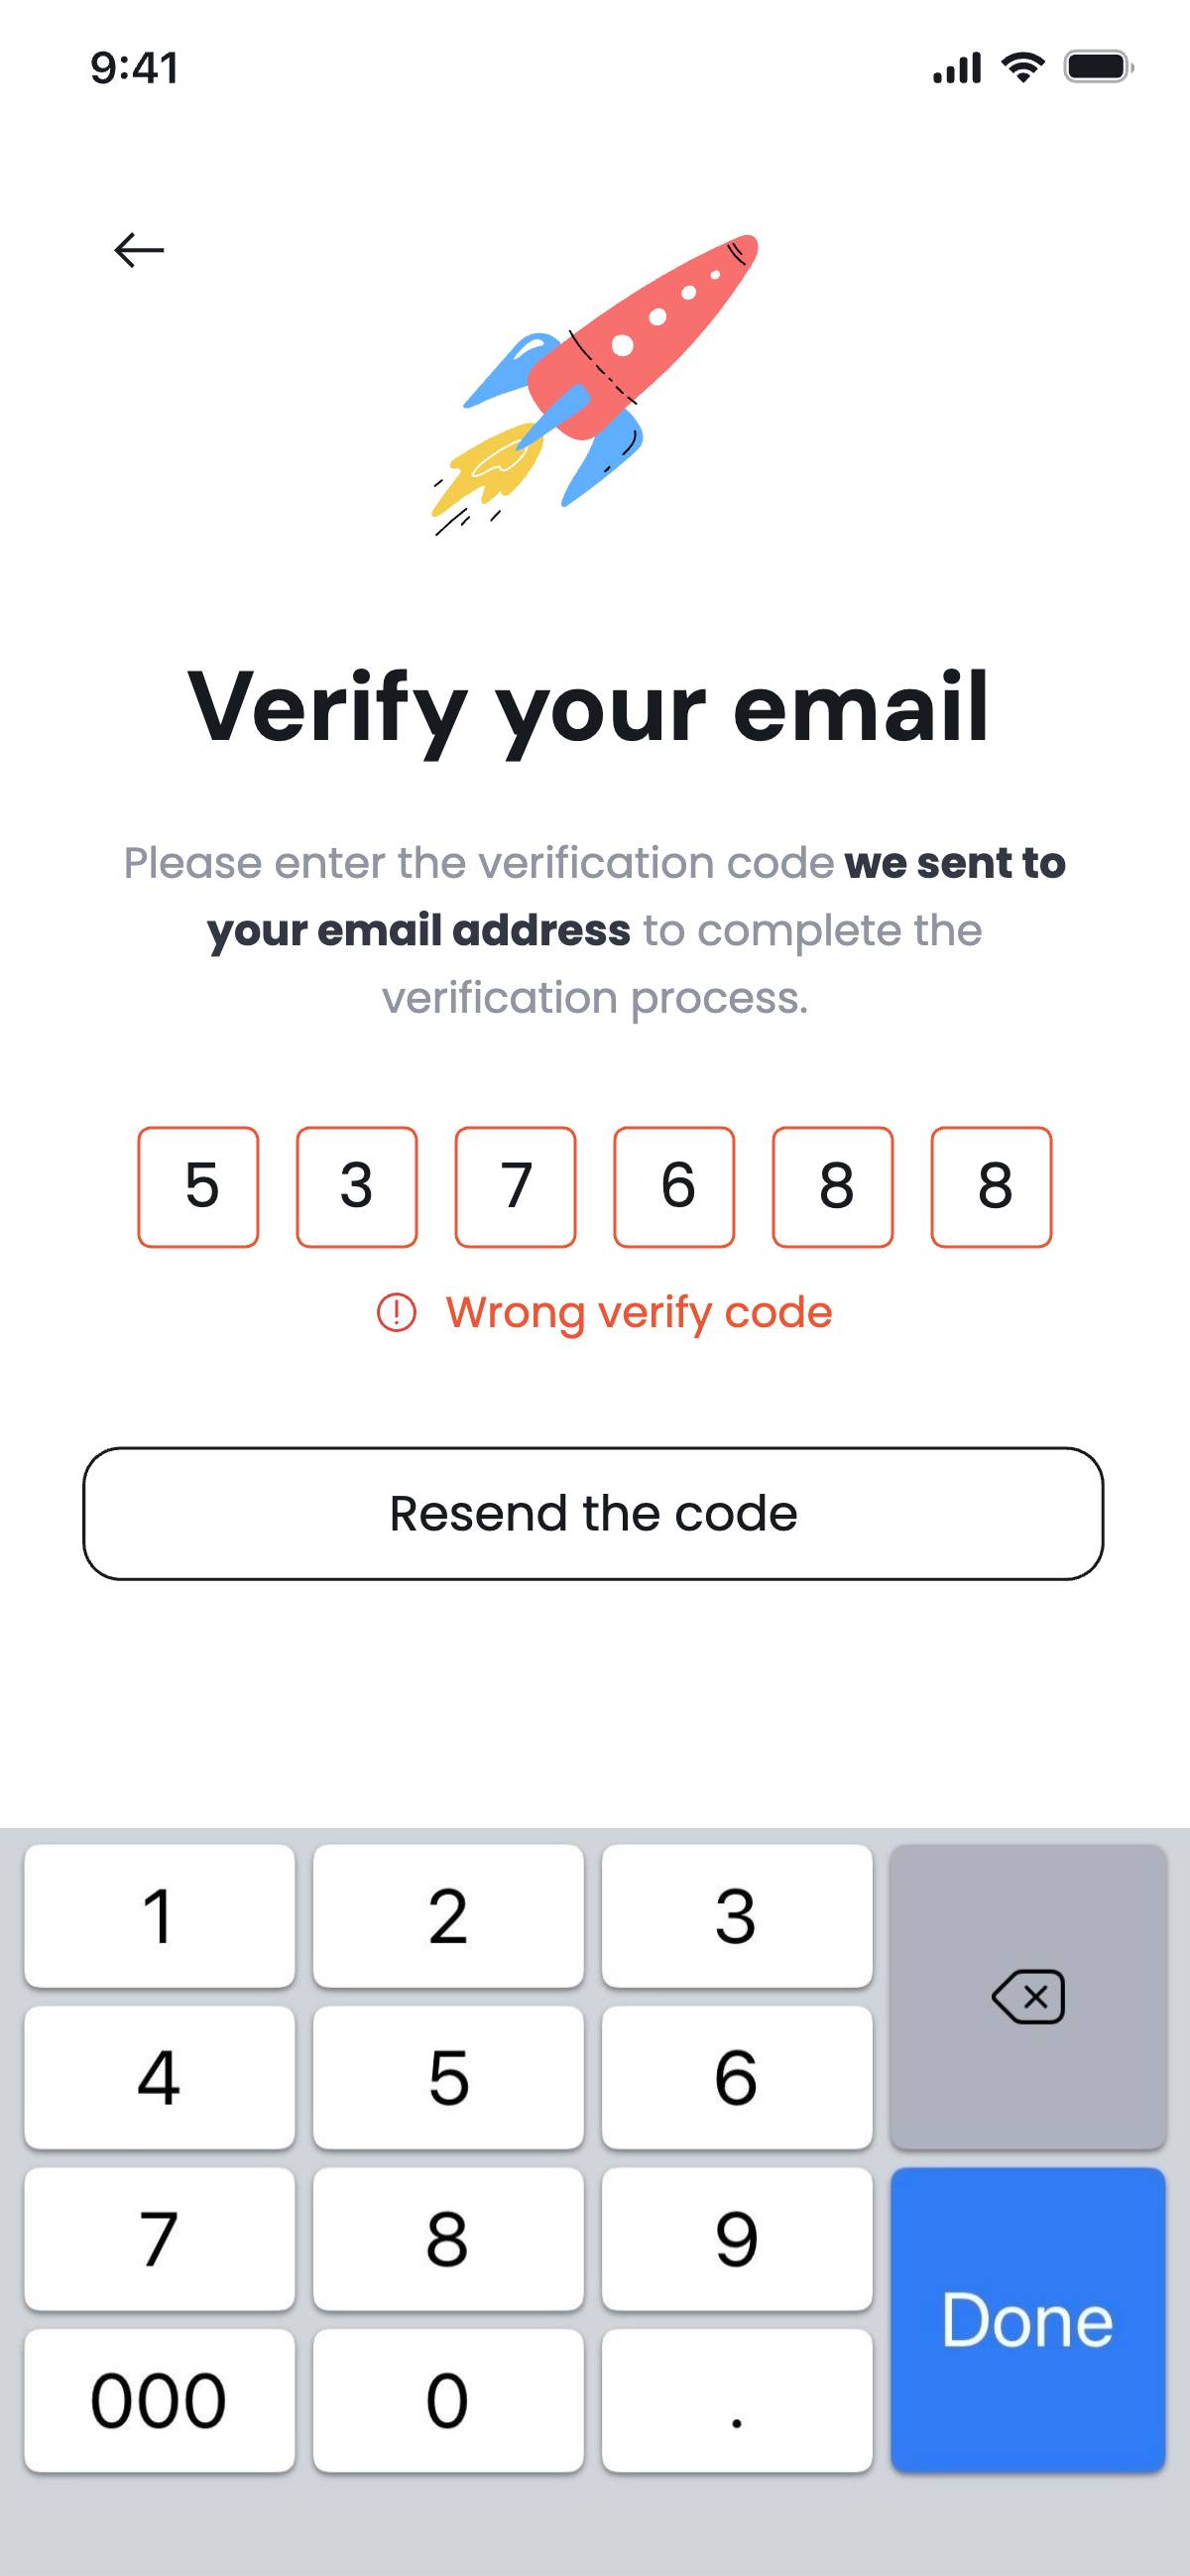 Sign up with email - Invalid code